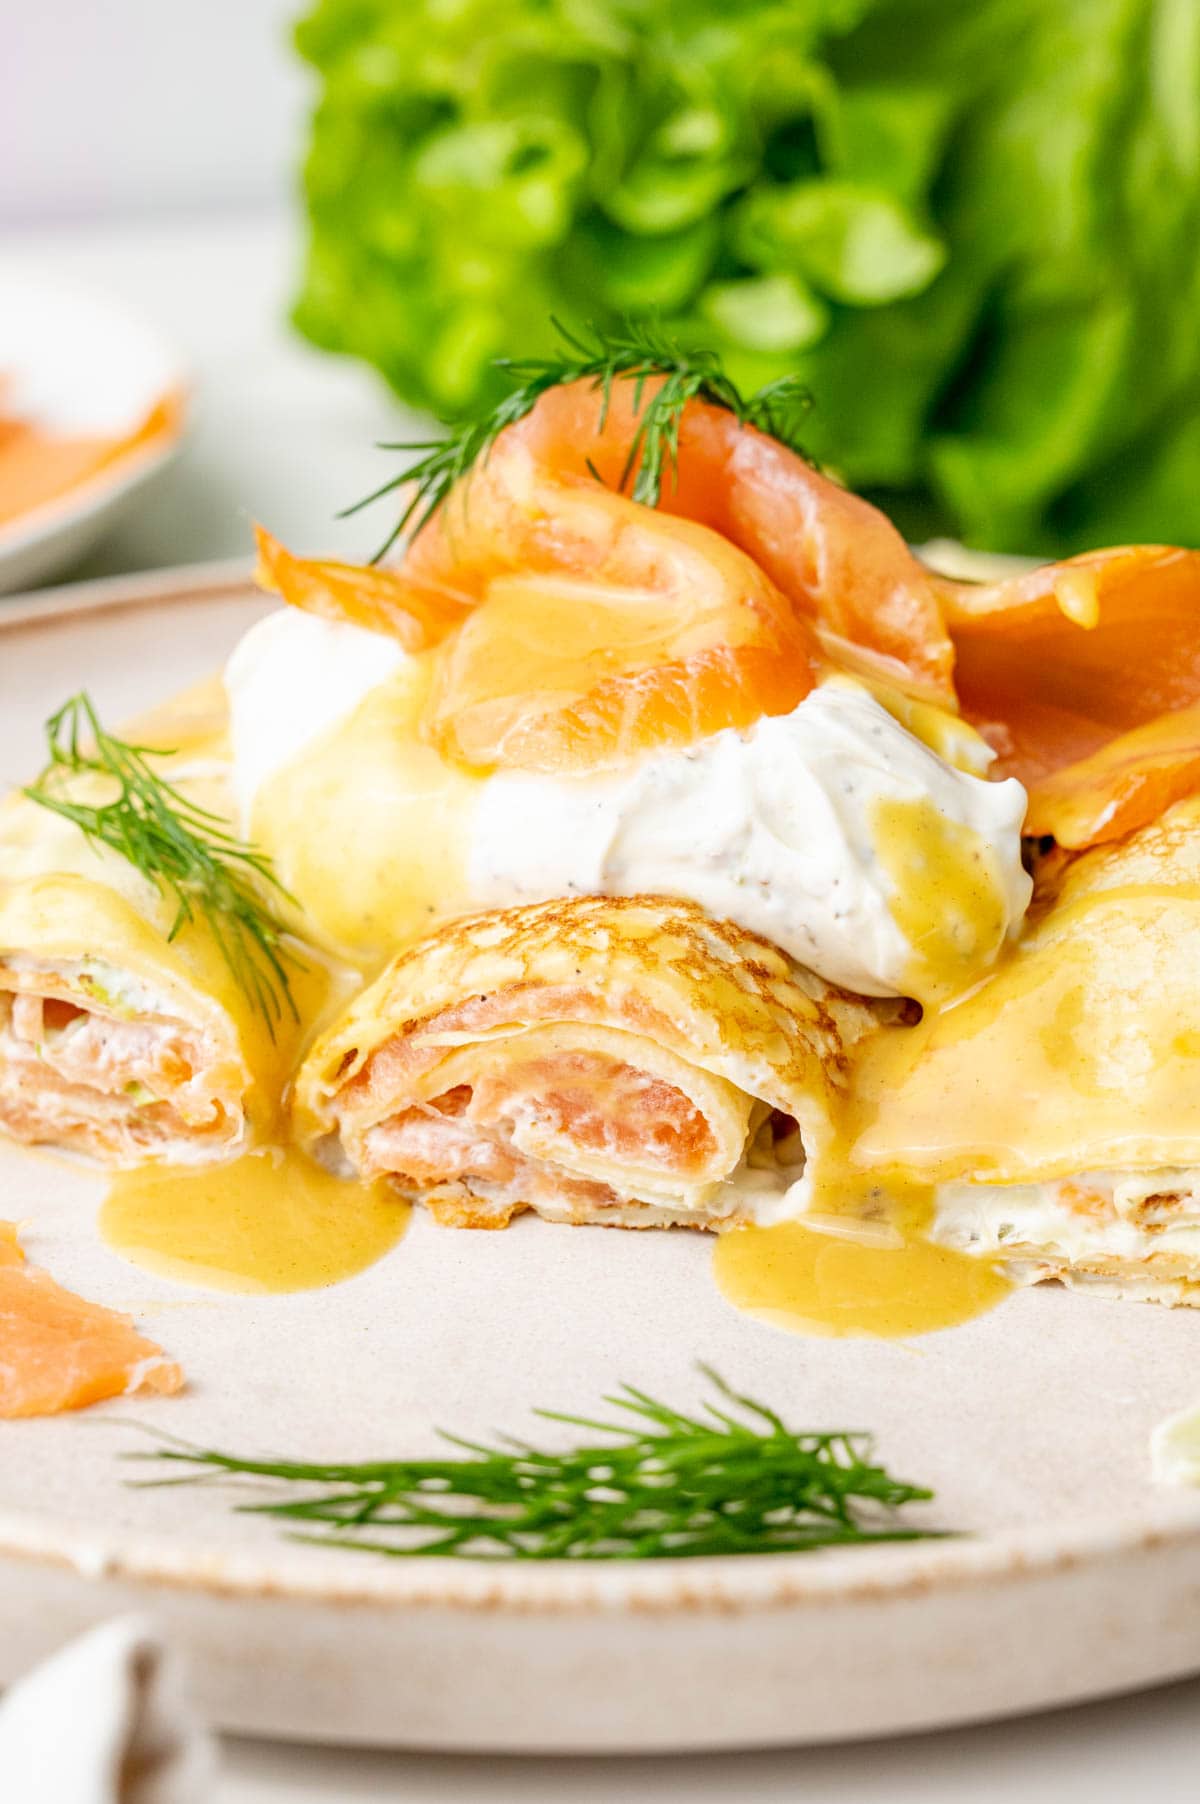 Smoked salmon crepes cut in half on a beige plate.